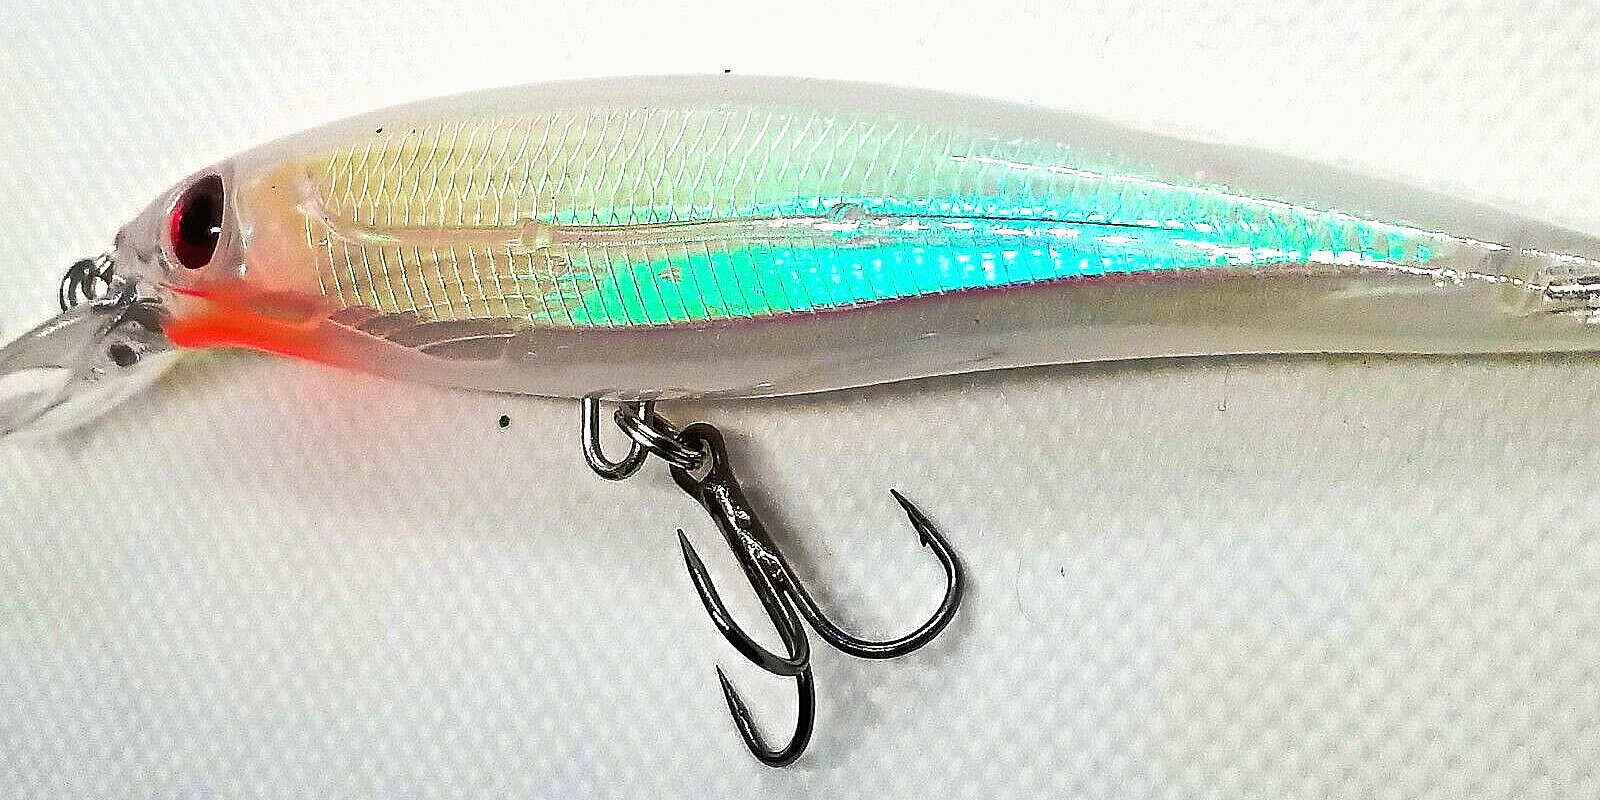 Primary image for DARKWATER WHITE WIDOW  x-rap rapala style Holographic Crankbait lure 4.5in